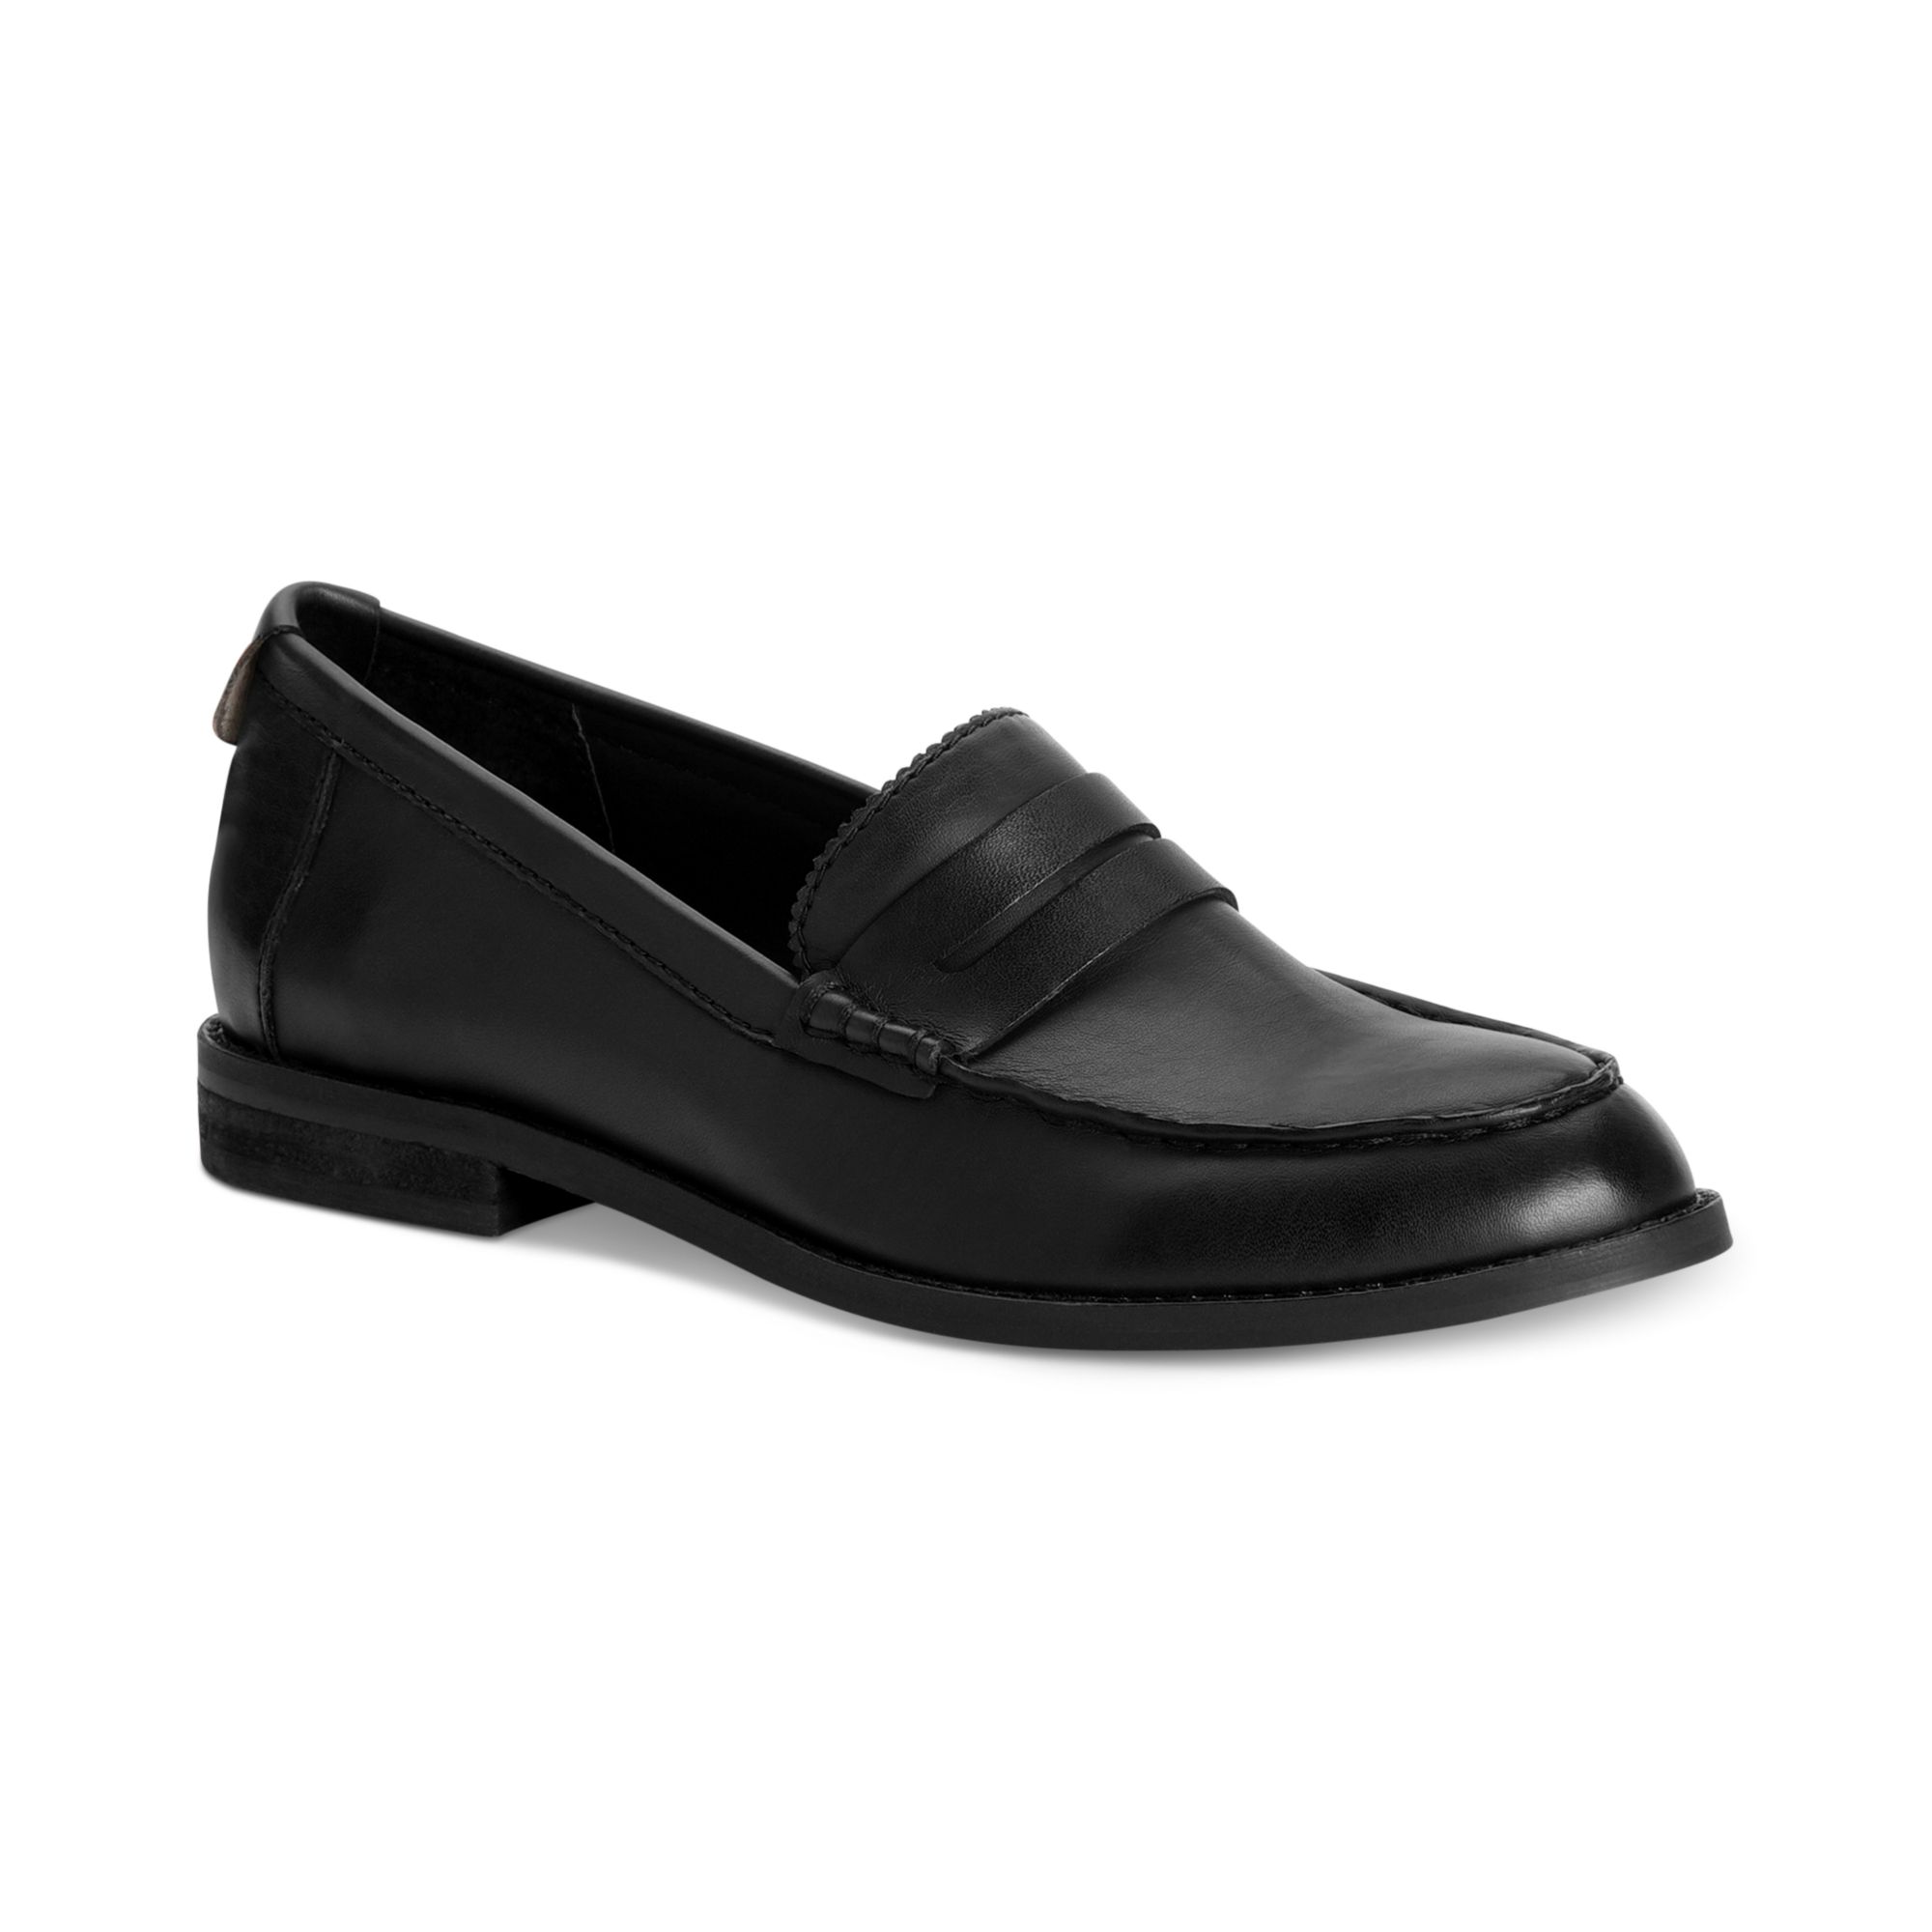 Lyst - Calvin Klein Shoes Sabria Loafers in Black